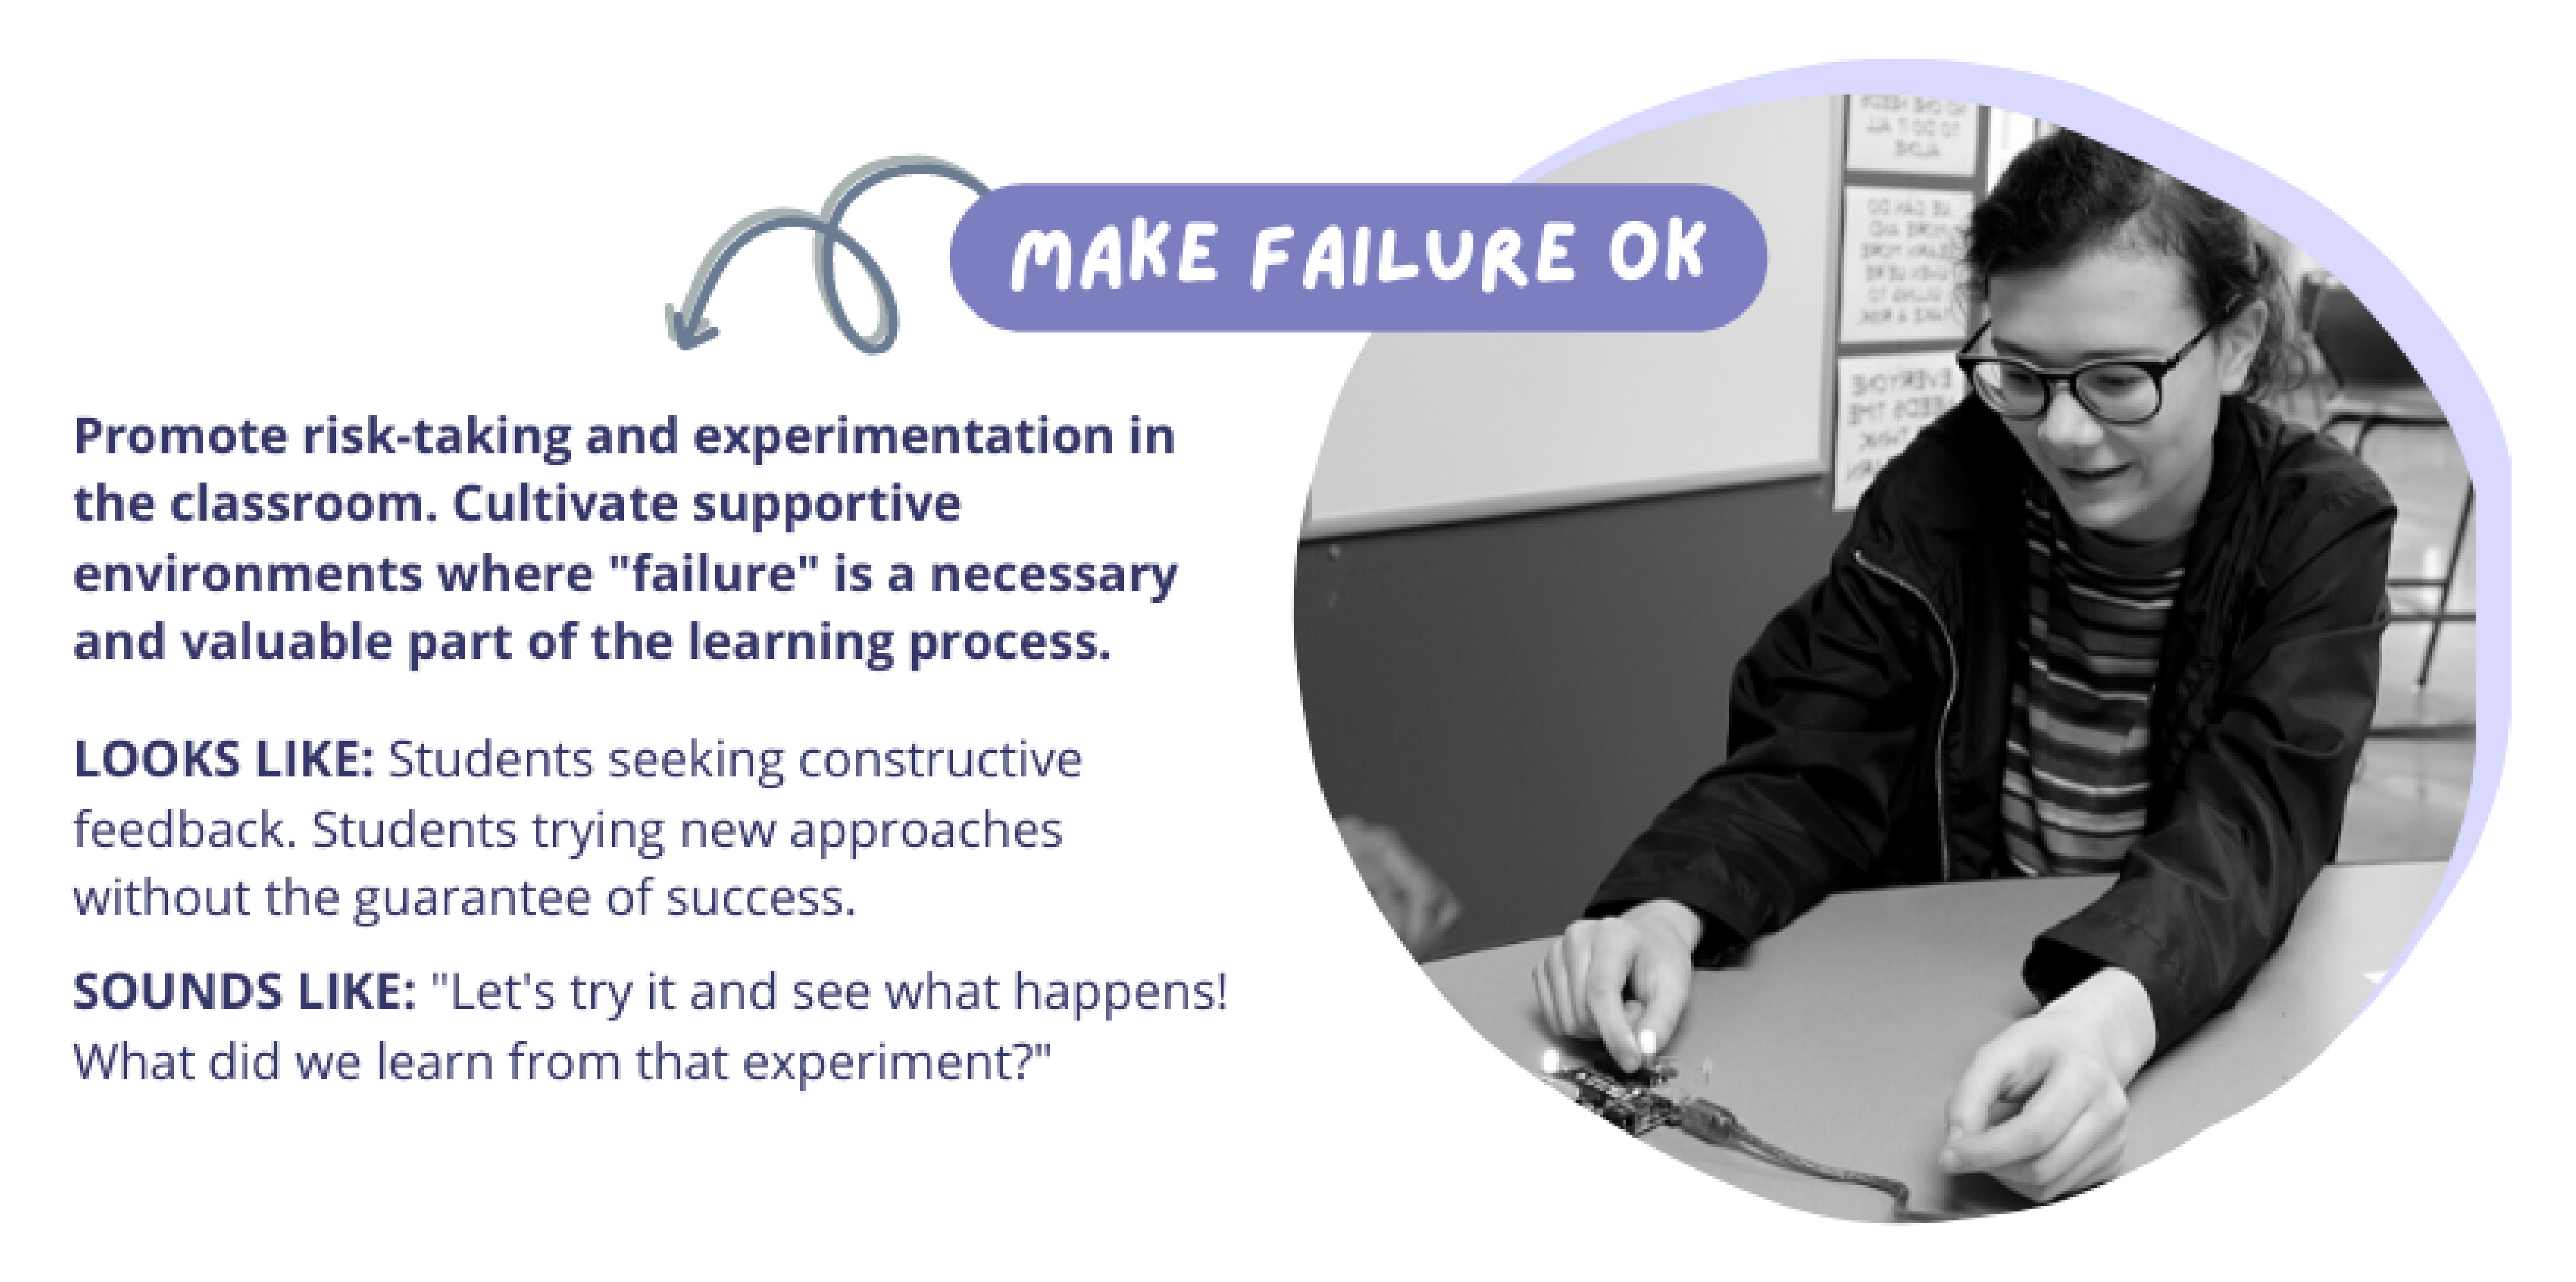 Make Failure OK: Promote risk-taking and experimentation in the classroom. Cultivate supportive environments where "failure" is a necessary and valuable part of the learning process.